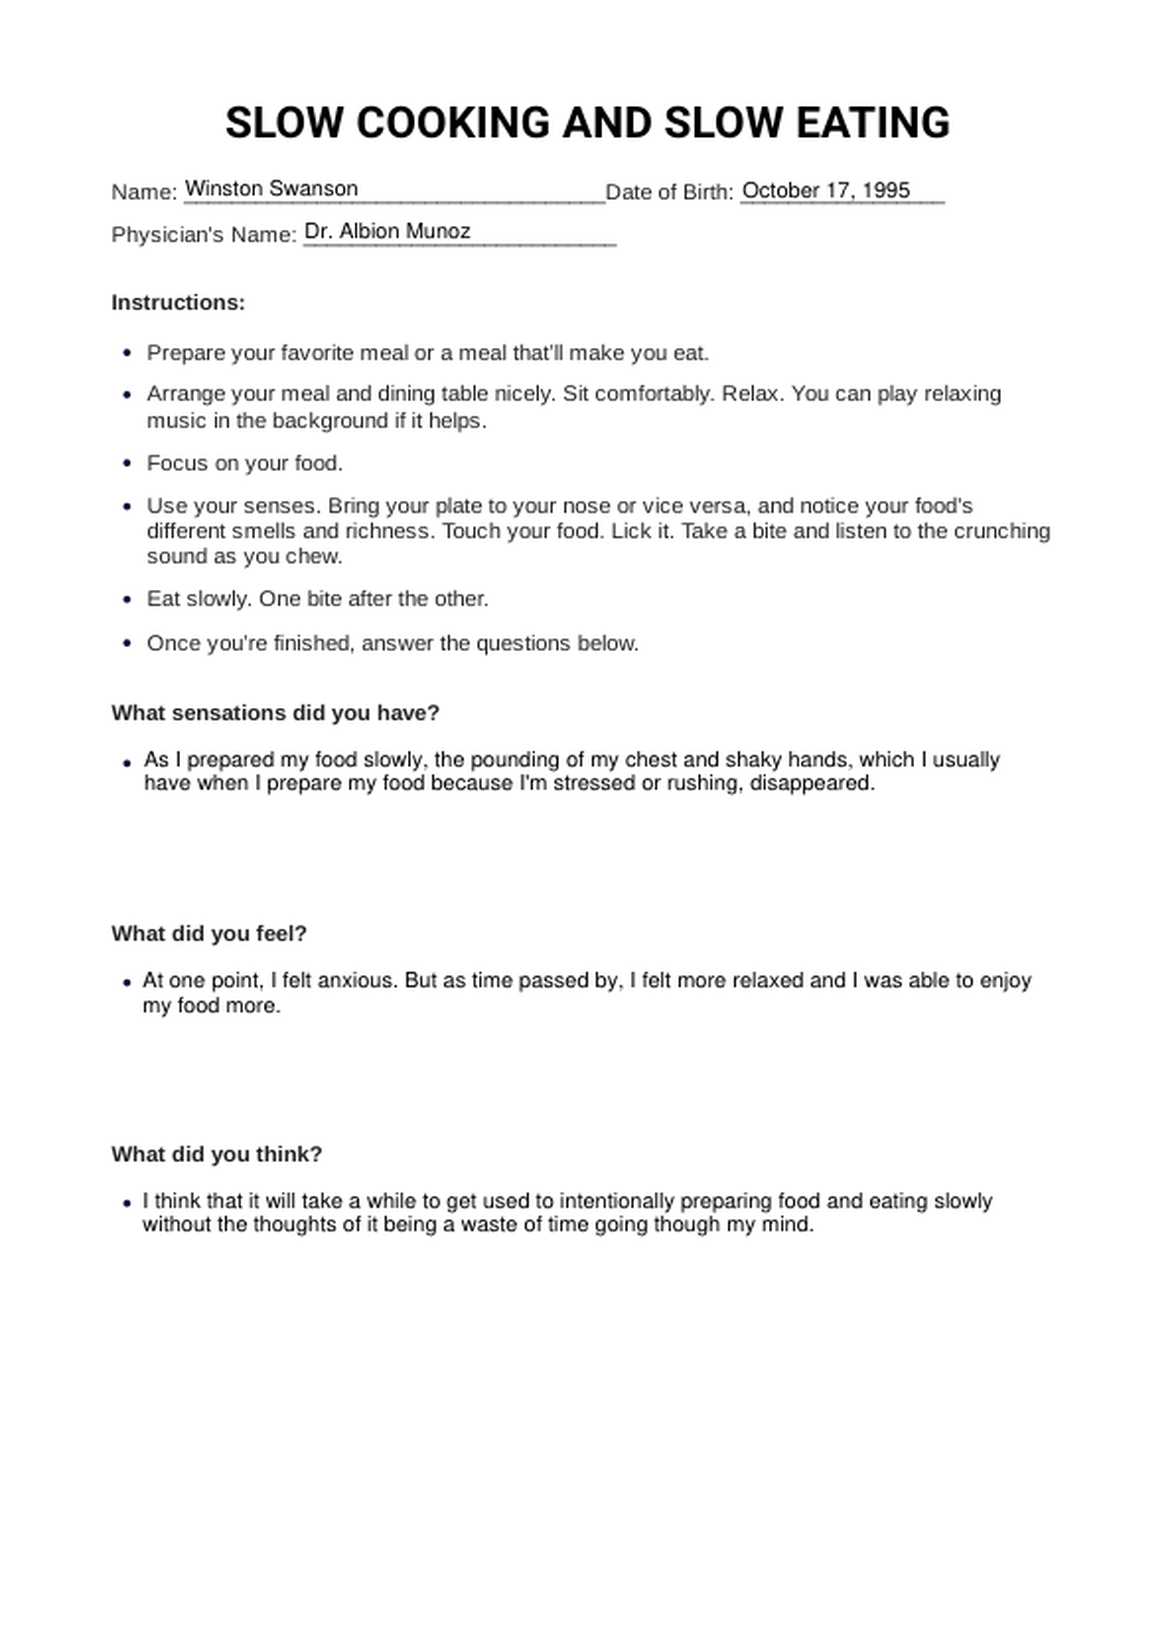 Slow Cooking and Slow Eating PTSD Exercise and Worksheets PDF Example